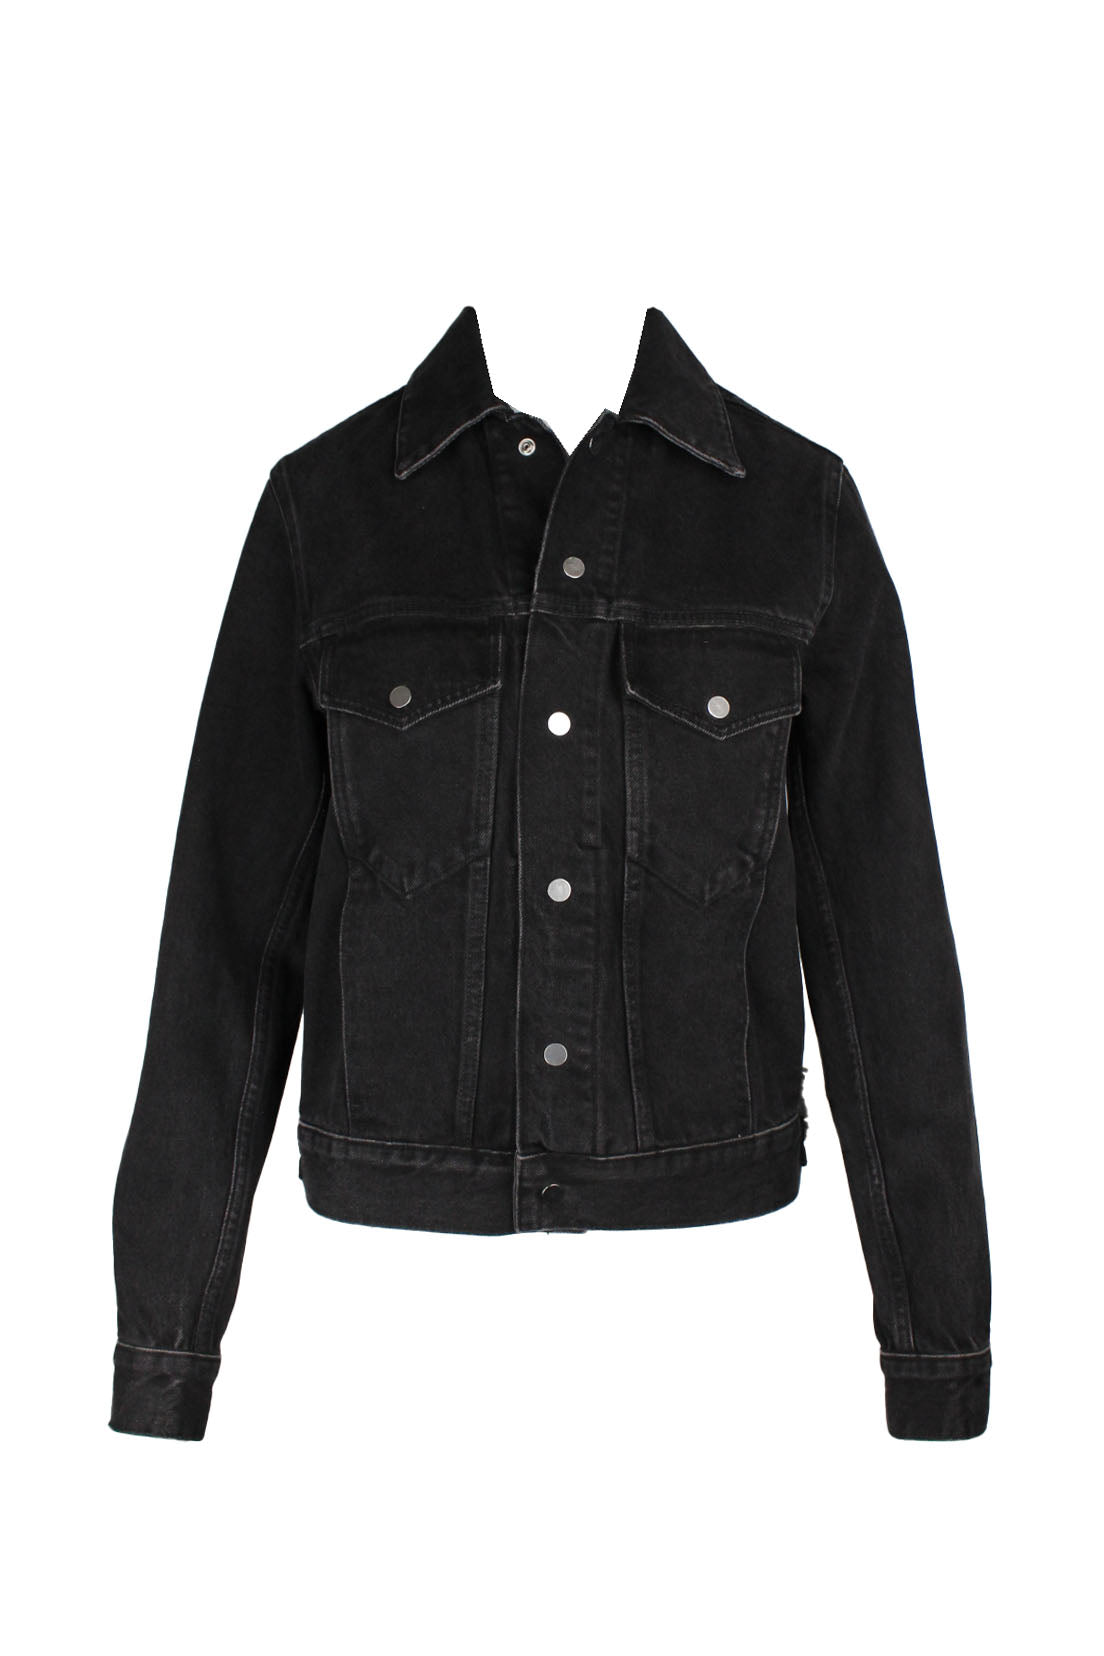 front of sandro paris black denim long sleeve jacket. features spread collar, flap pockets at chest, side seam pockets, tonal stitching, and snap button closure. 